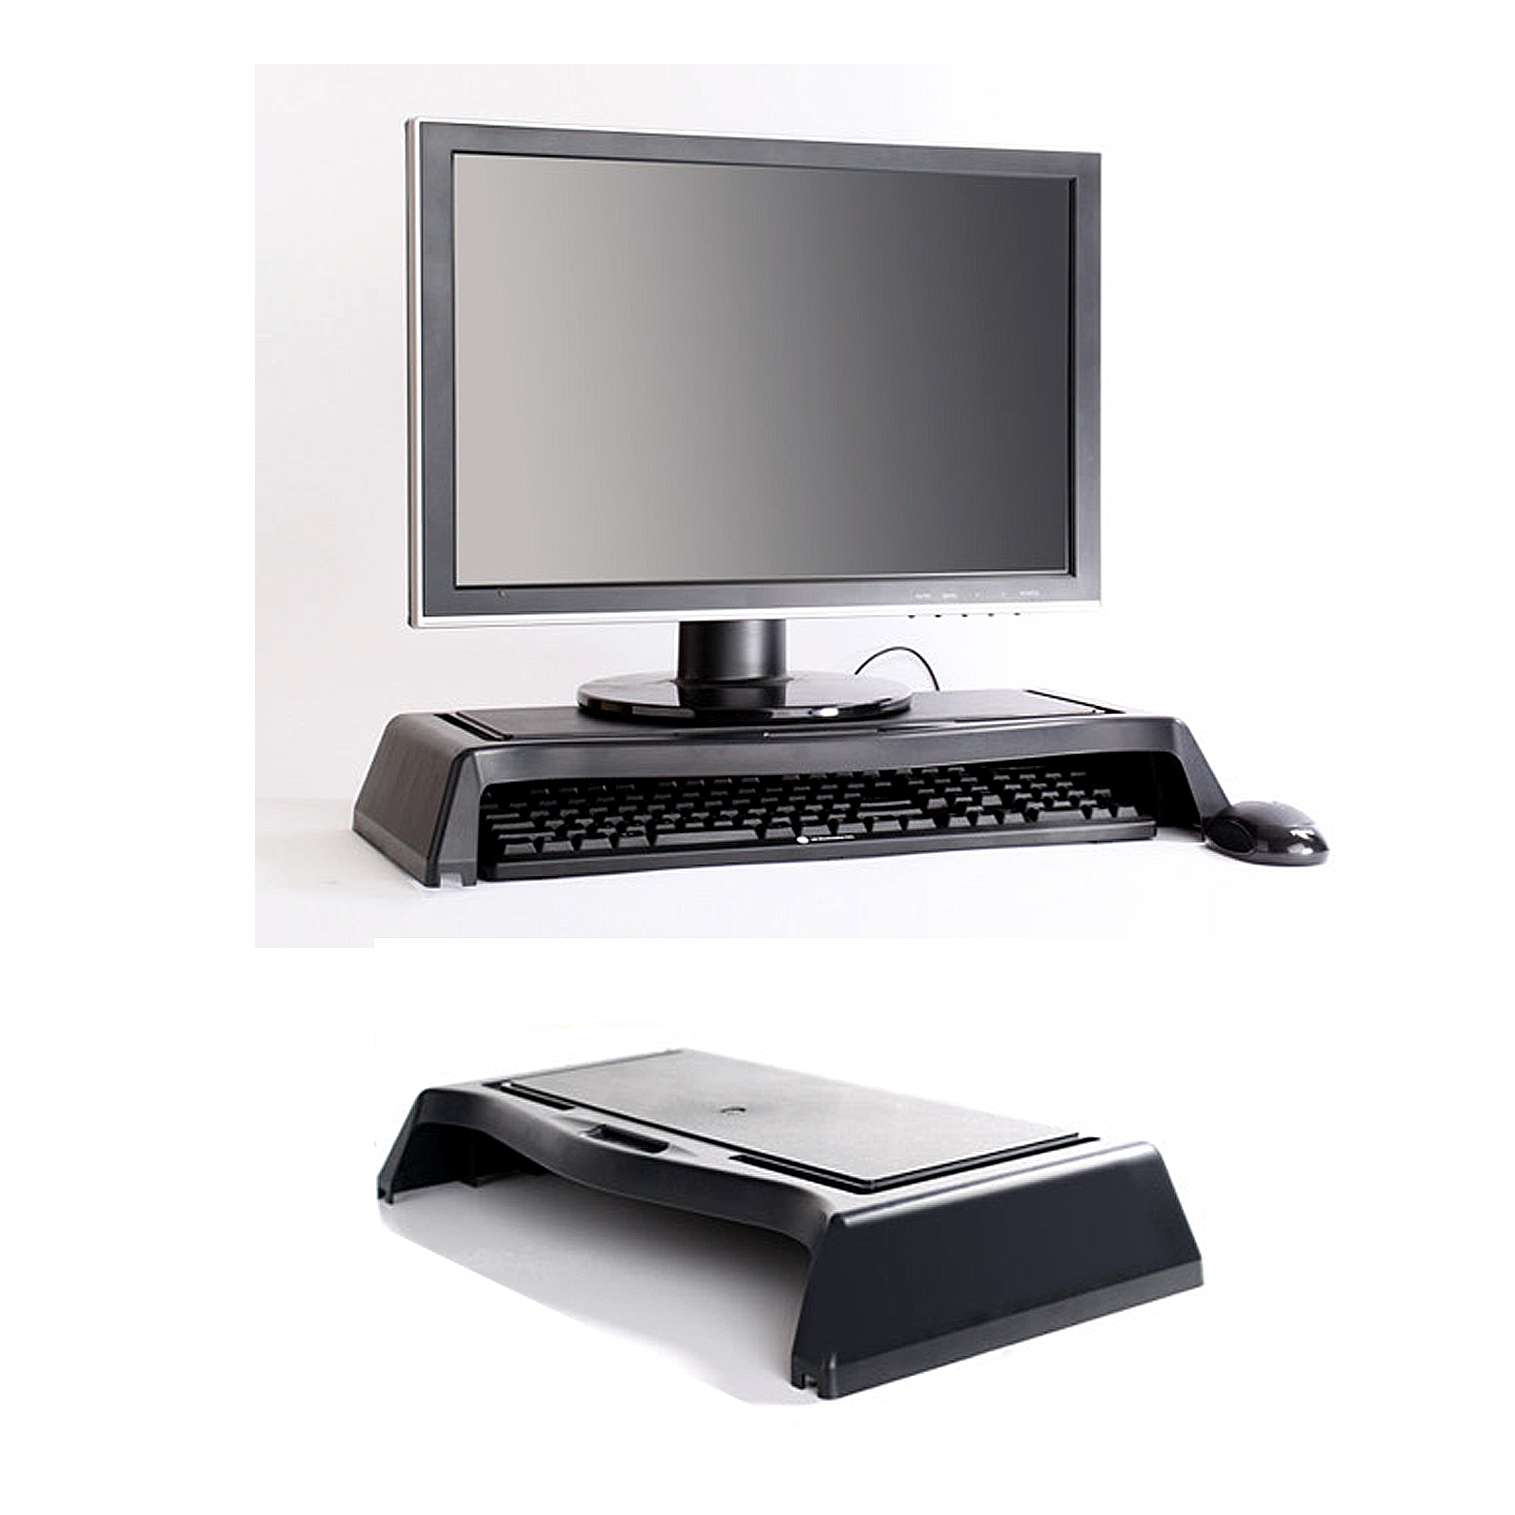 New LCD Monitor Stand Laptop Holder Tray Desktop Arrangements Office Home Black